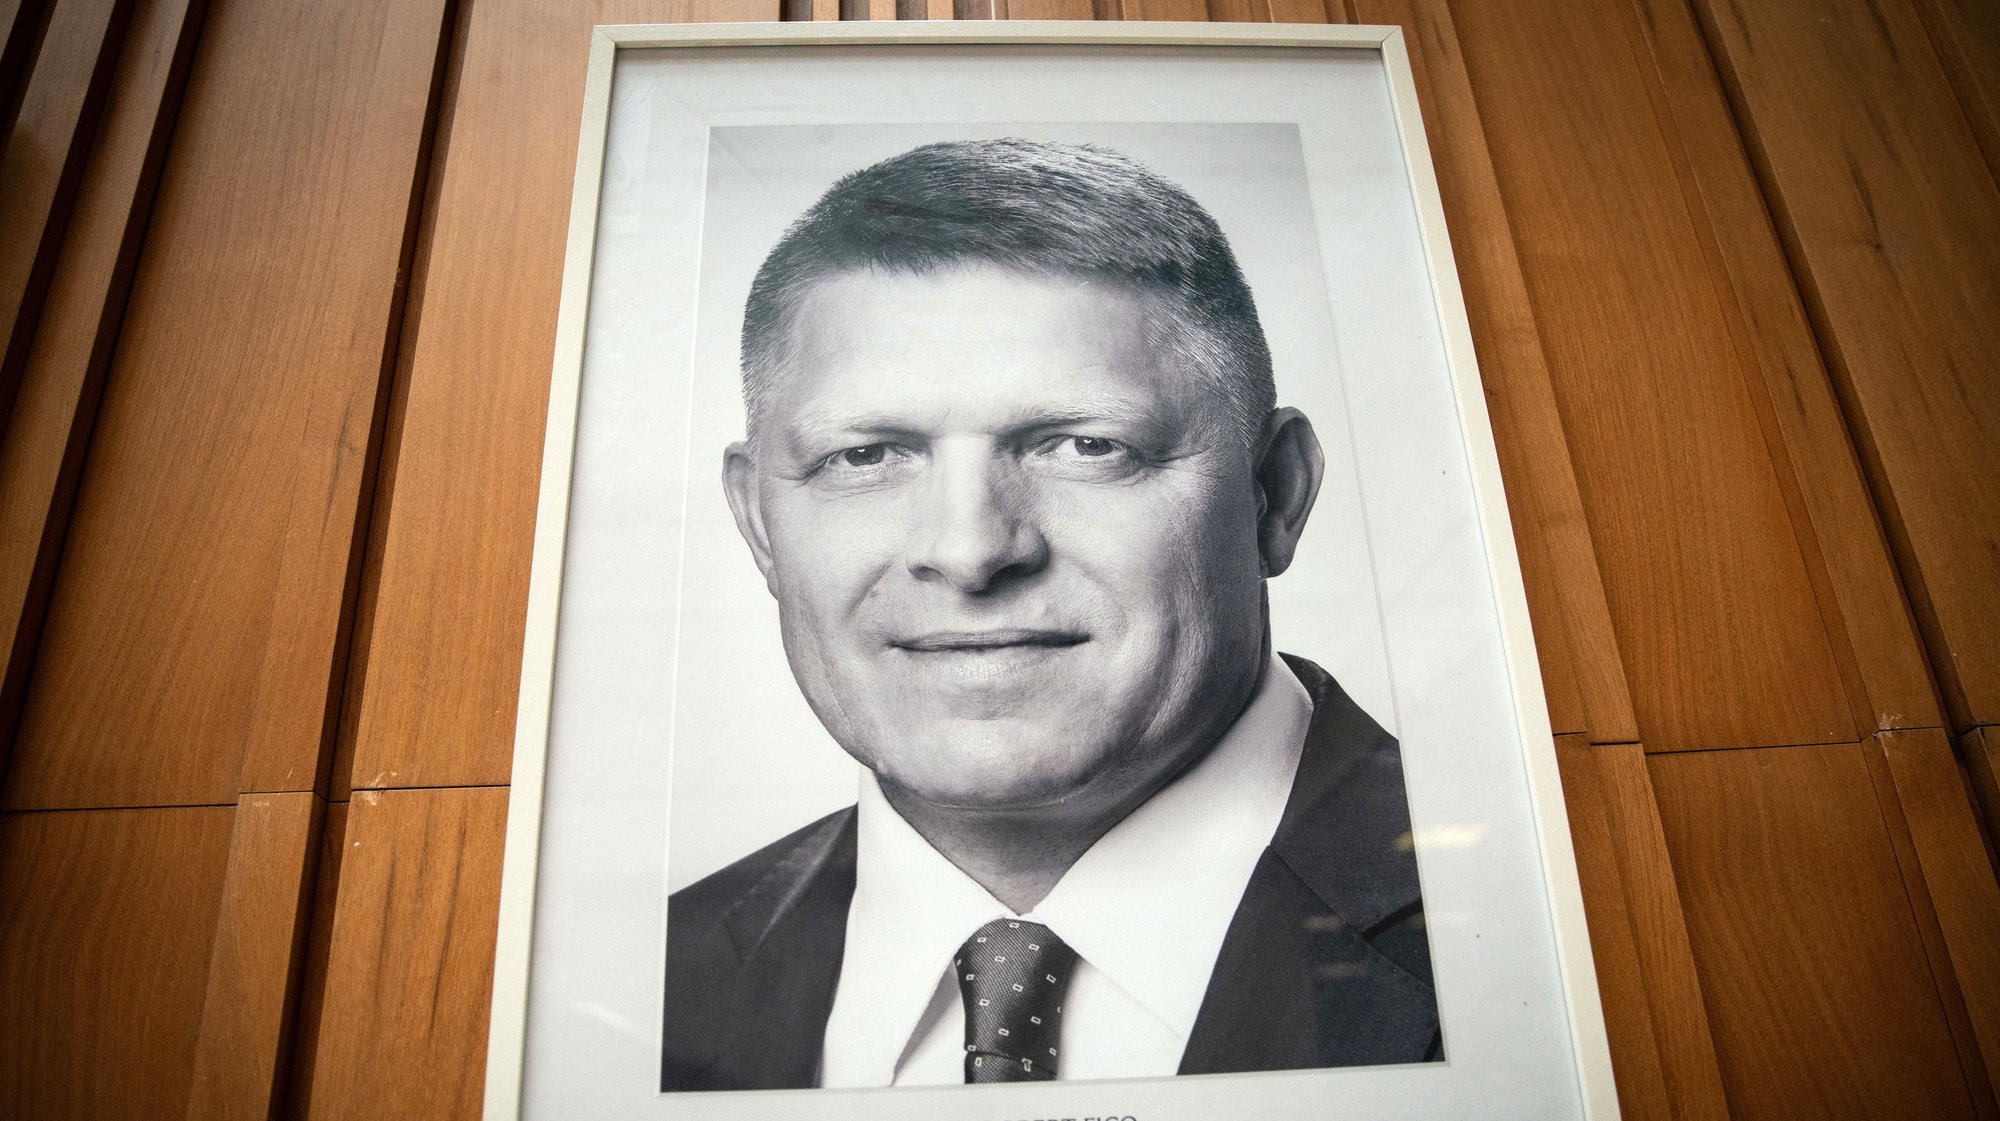 epa11359522 A portrait of Slovak Prime Minister Robert Fico is seen on the wall of the Government Office of the Slovak Republic in Bratislava, Slovakia, 22 May 2024. Slovak Prime Minister Robert Fico was shot and injured in Handlova on 15 May and transported to a hospital in a life-threatening condition; the shooting suspect was arrested on spot.  EPA/JAKUB GAVLAK